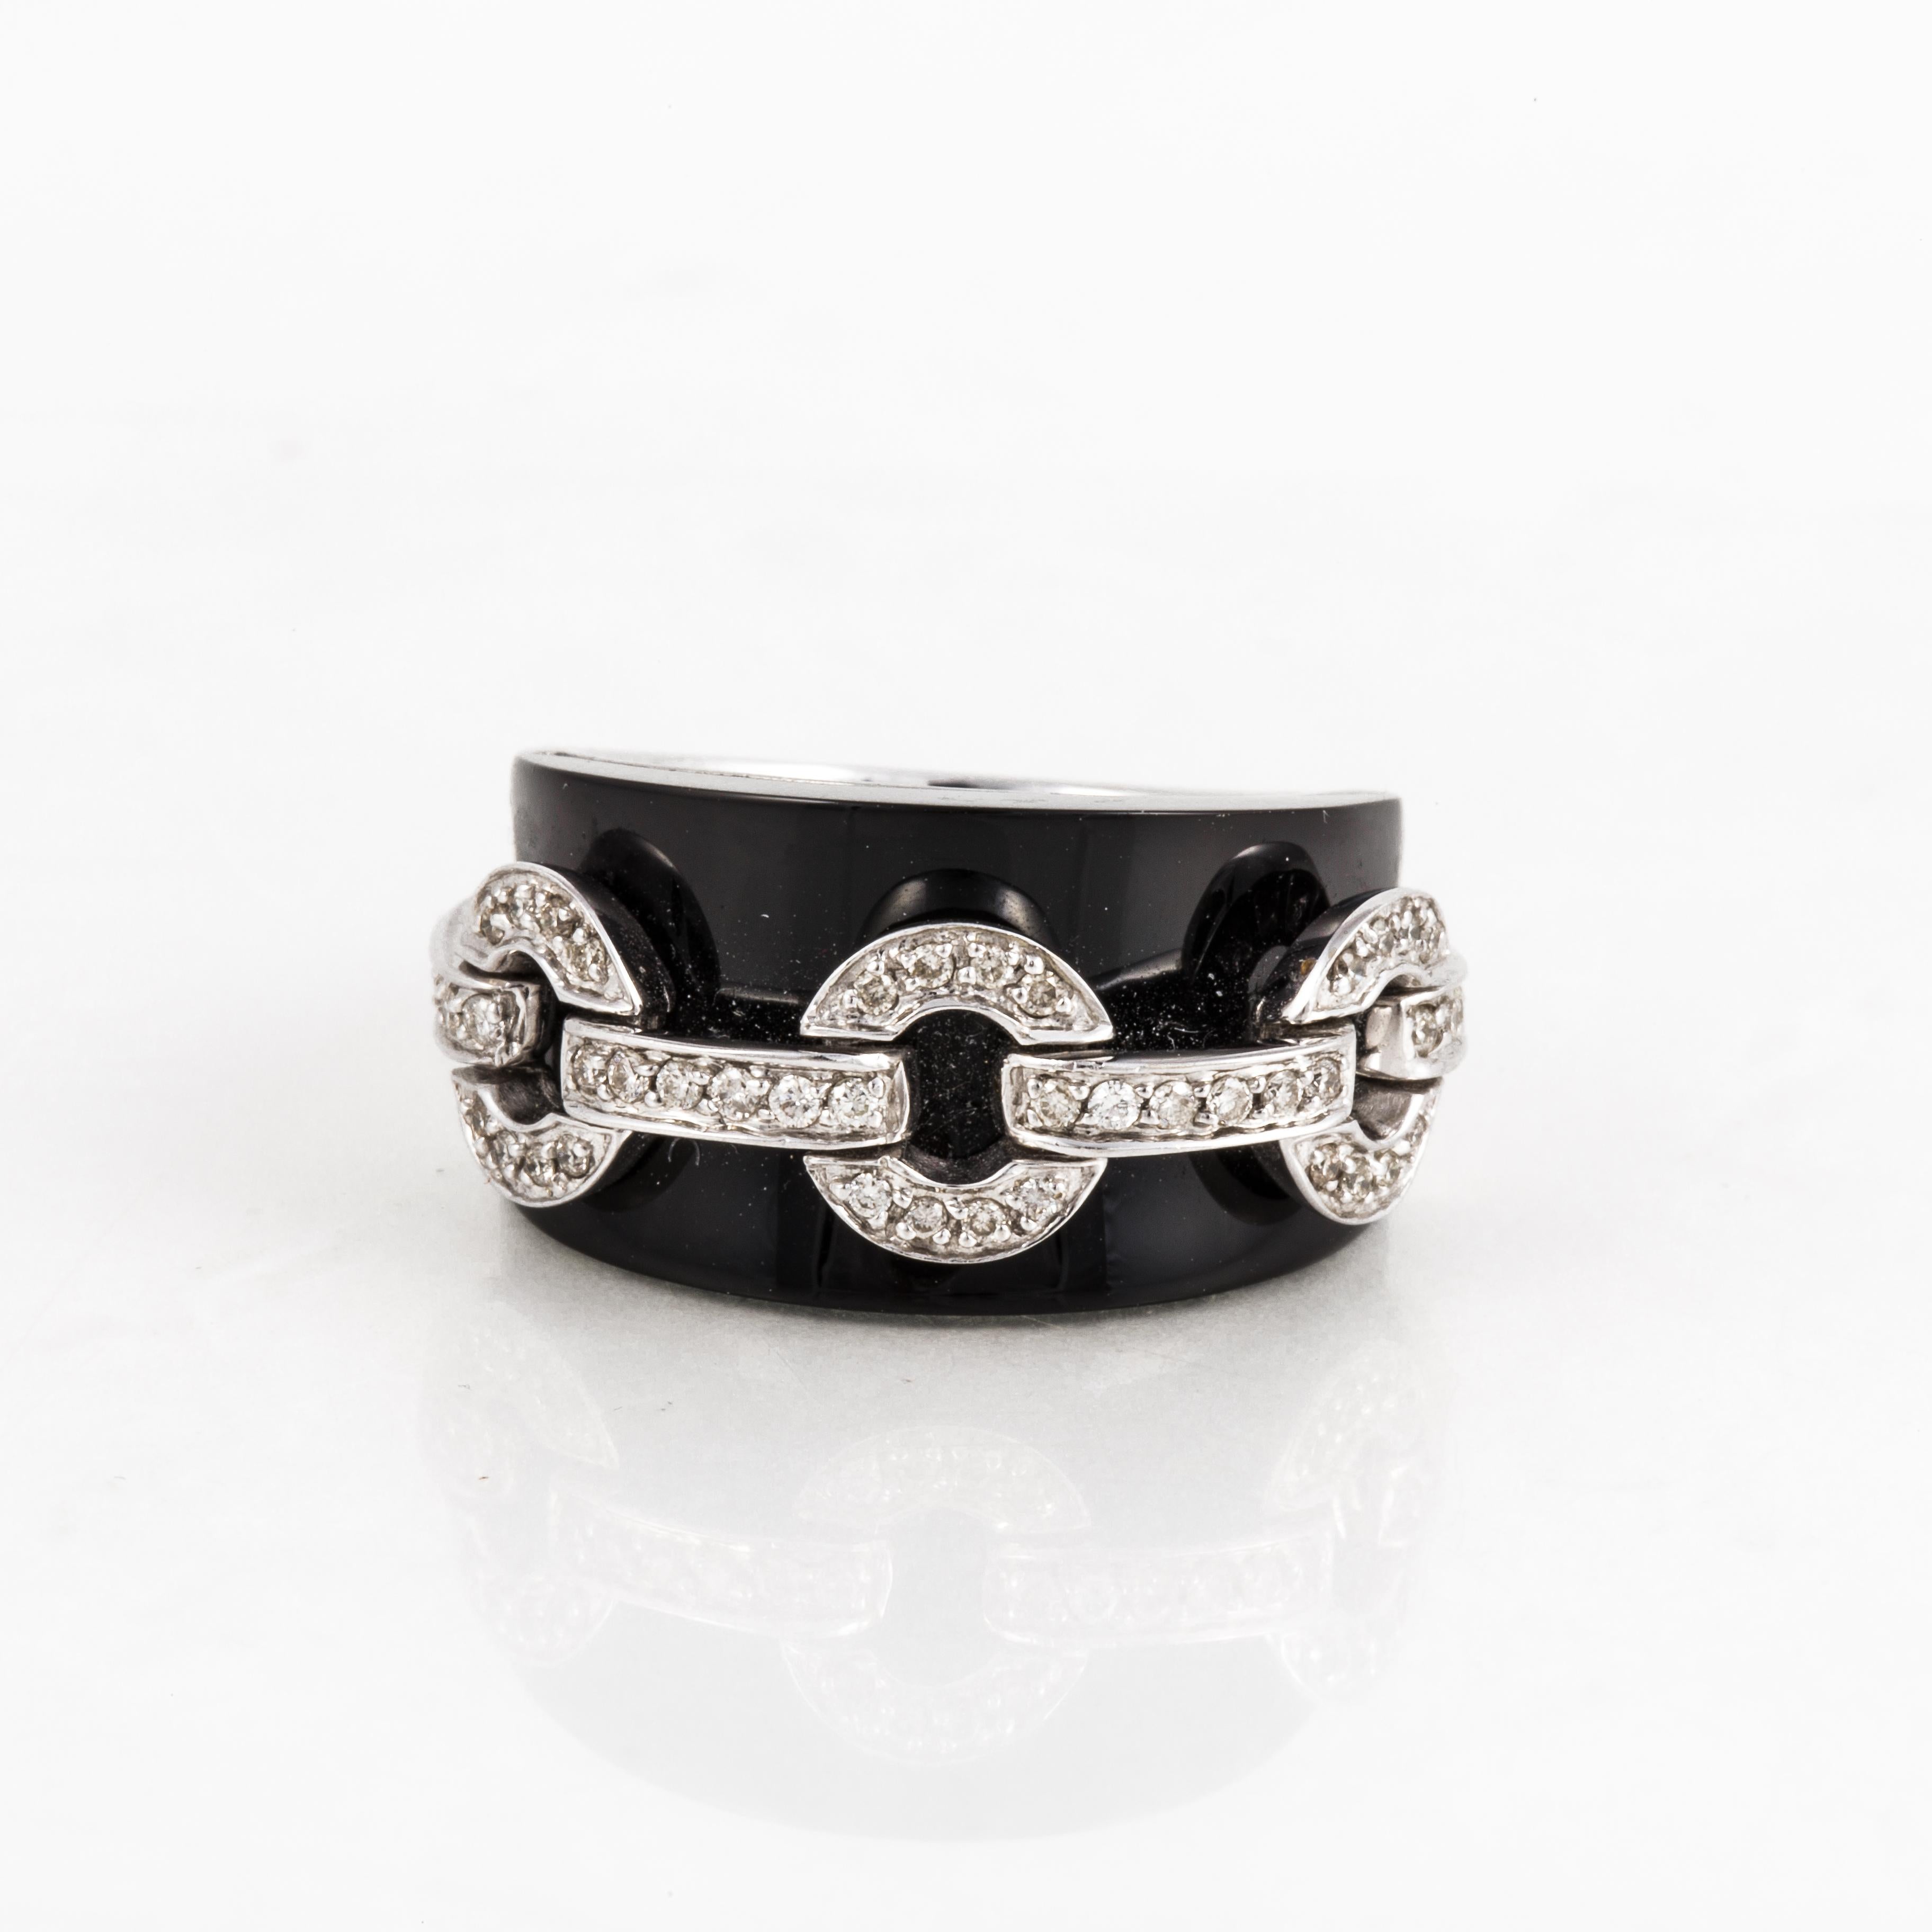 18K white gold cigar band style ring with black onyx and diamonds.  The onyx is curved and is accented by 46 round diamonds in a circle link design.  Diamonds total 0.50 carats. Measures 7/8 inches by 3/8 inches.